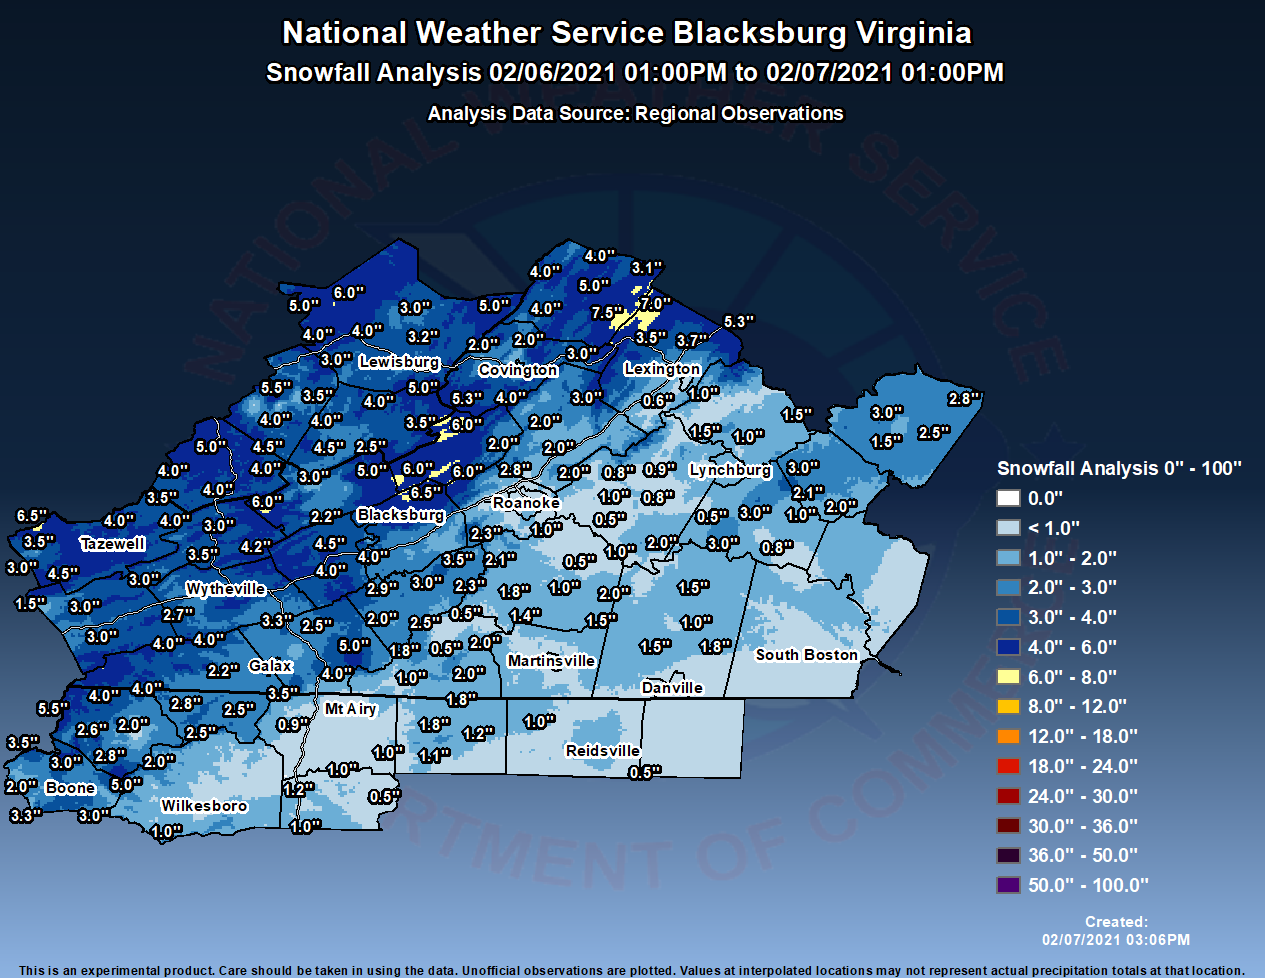 Snowfall analysis from Feb 6th and 7th, 2021